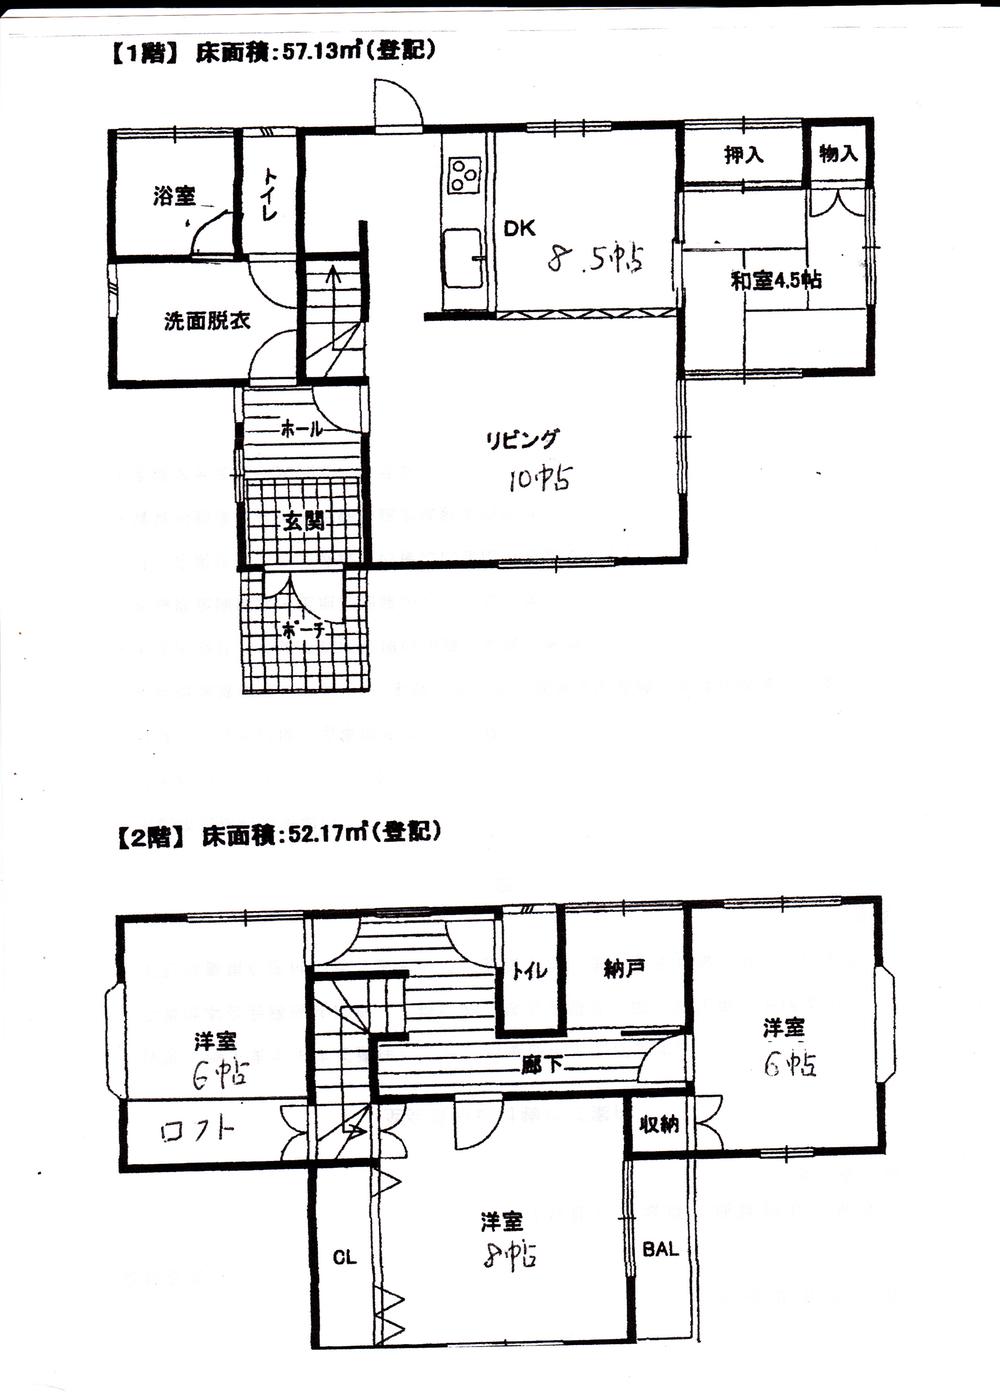 Floor plan. 13.8 million yen, 4LDK + S (storeroom), Land area 153.06 sq m , Building area 109.3 sq m 4LDKS, is on the second floor Western-style there with loft, There it stands digging Build put the Japanese-style room! 